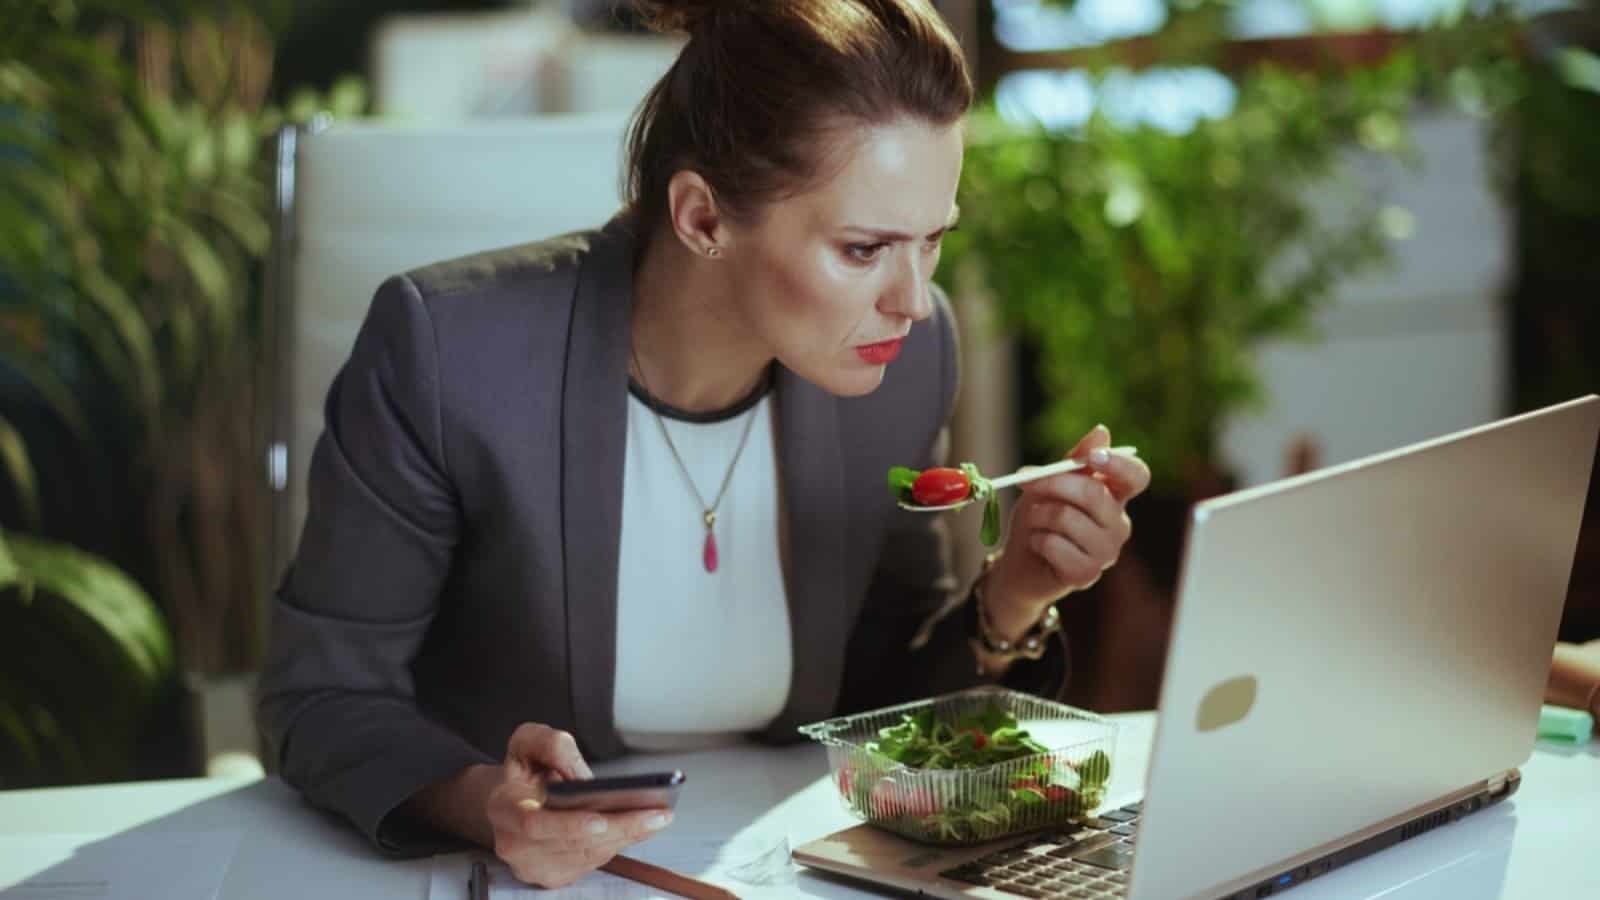 Middle aged woman eating salad in her workplace